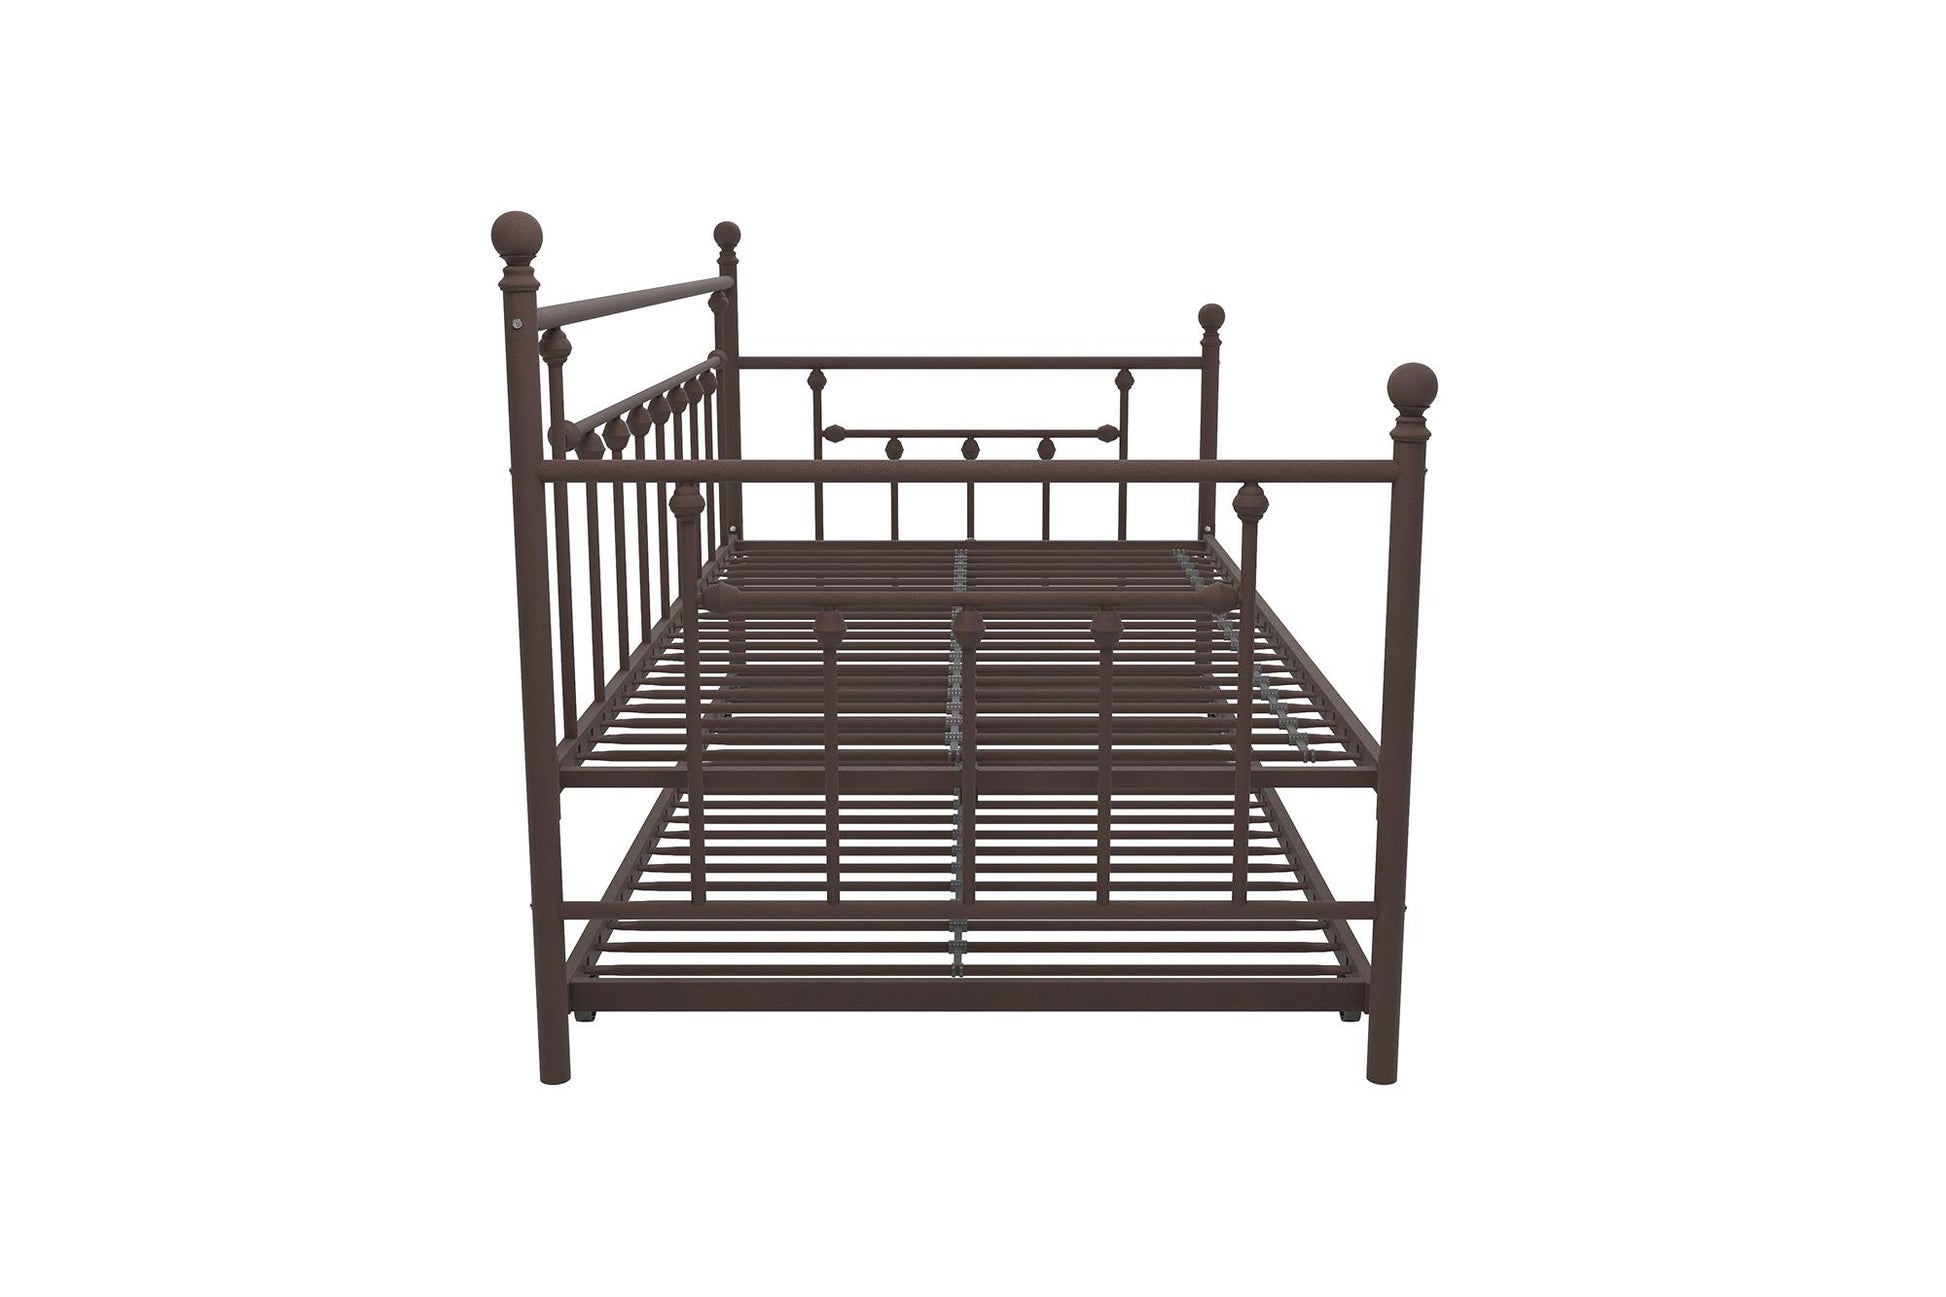 Manila Metal Daybed and Trundle Set with Sturdy Metal Frame and Slats - Bronze - Twin